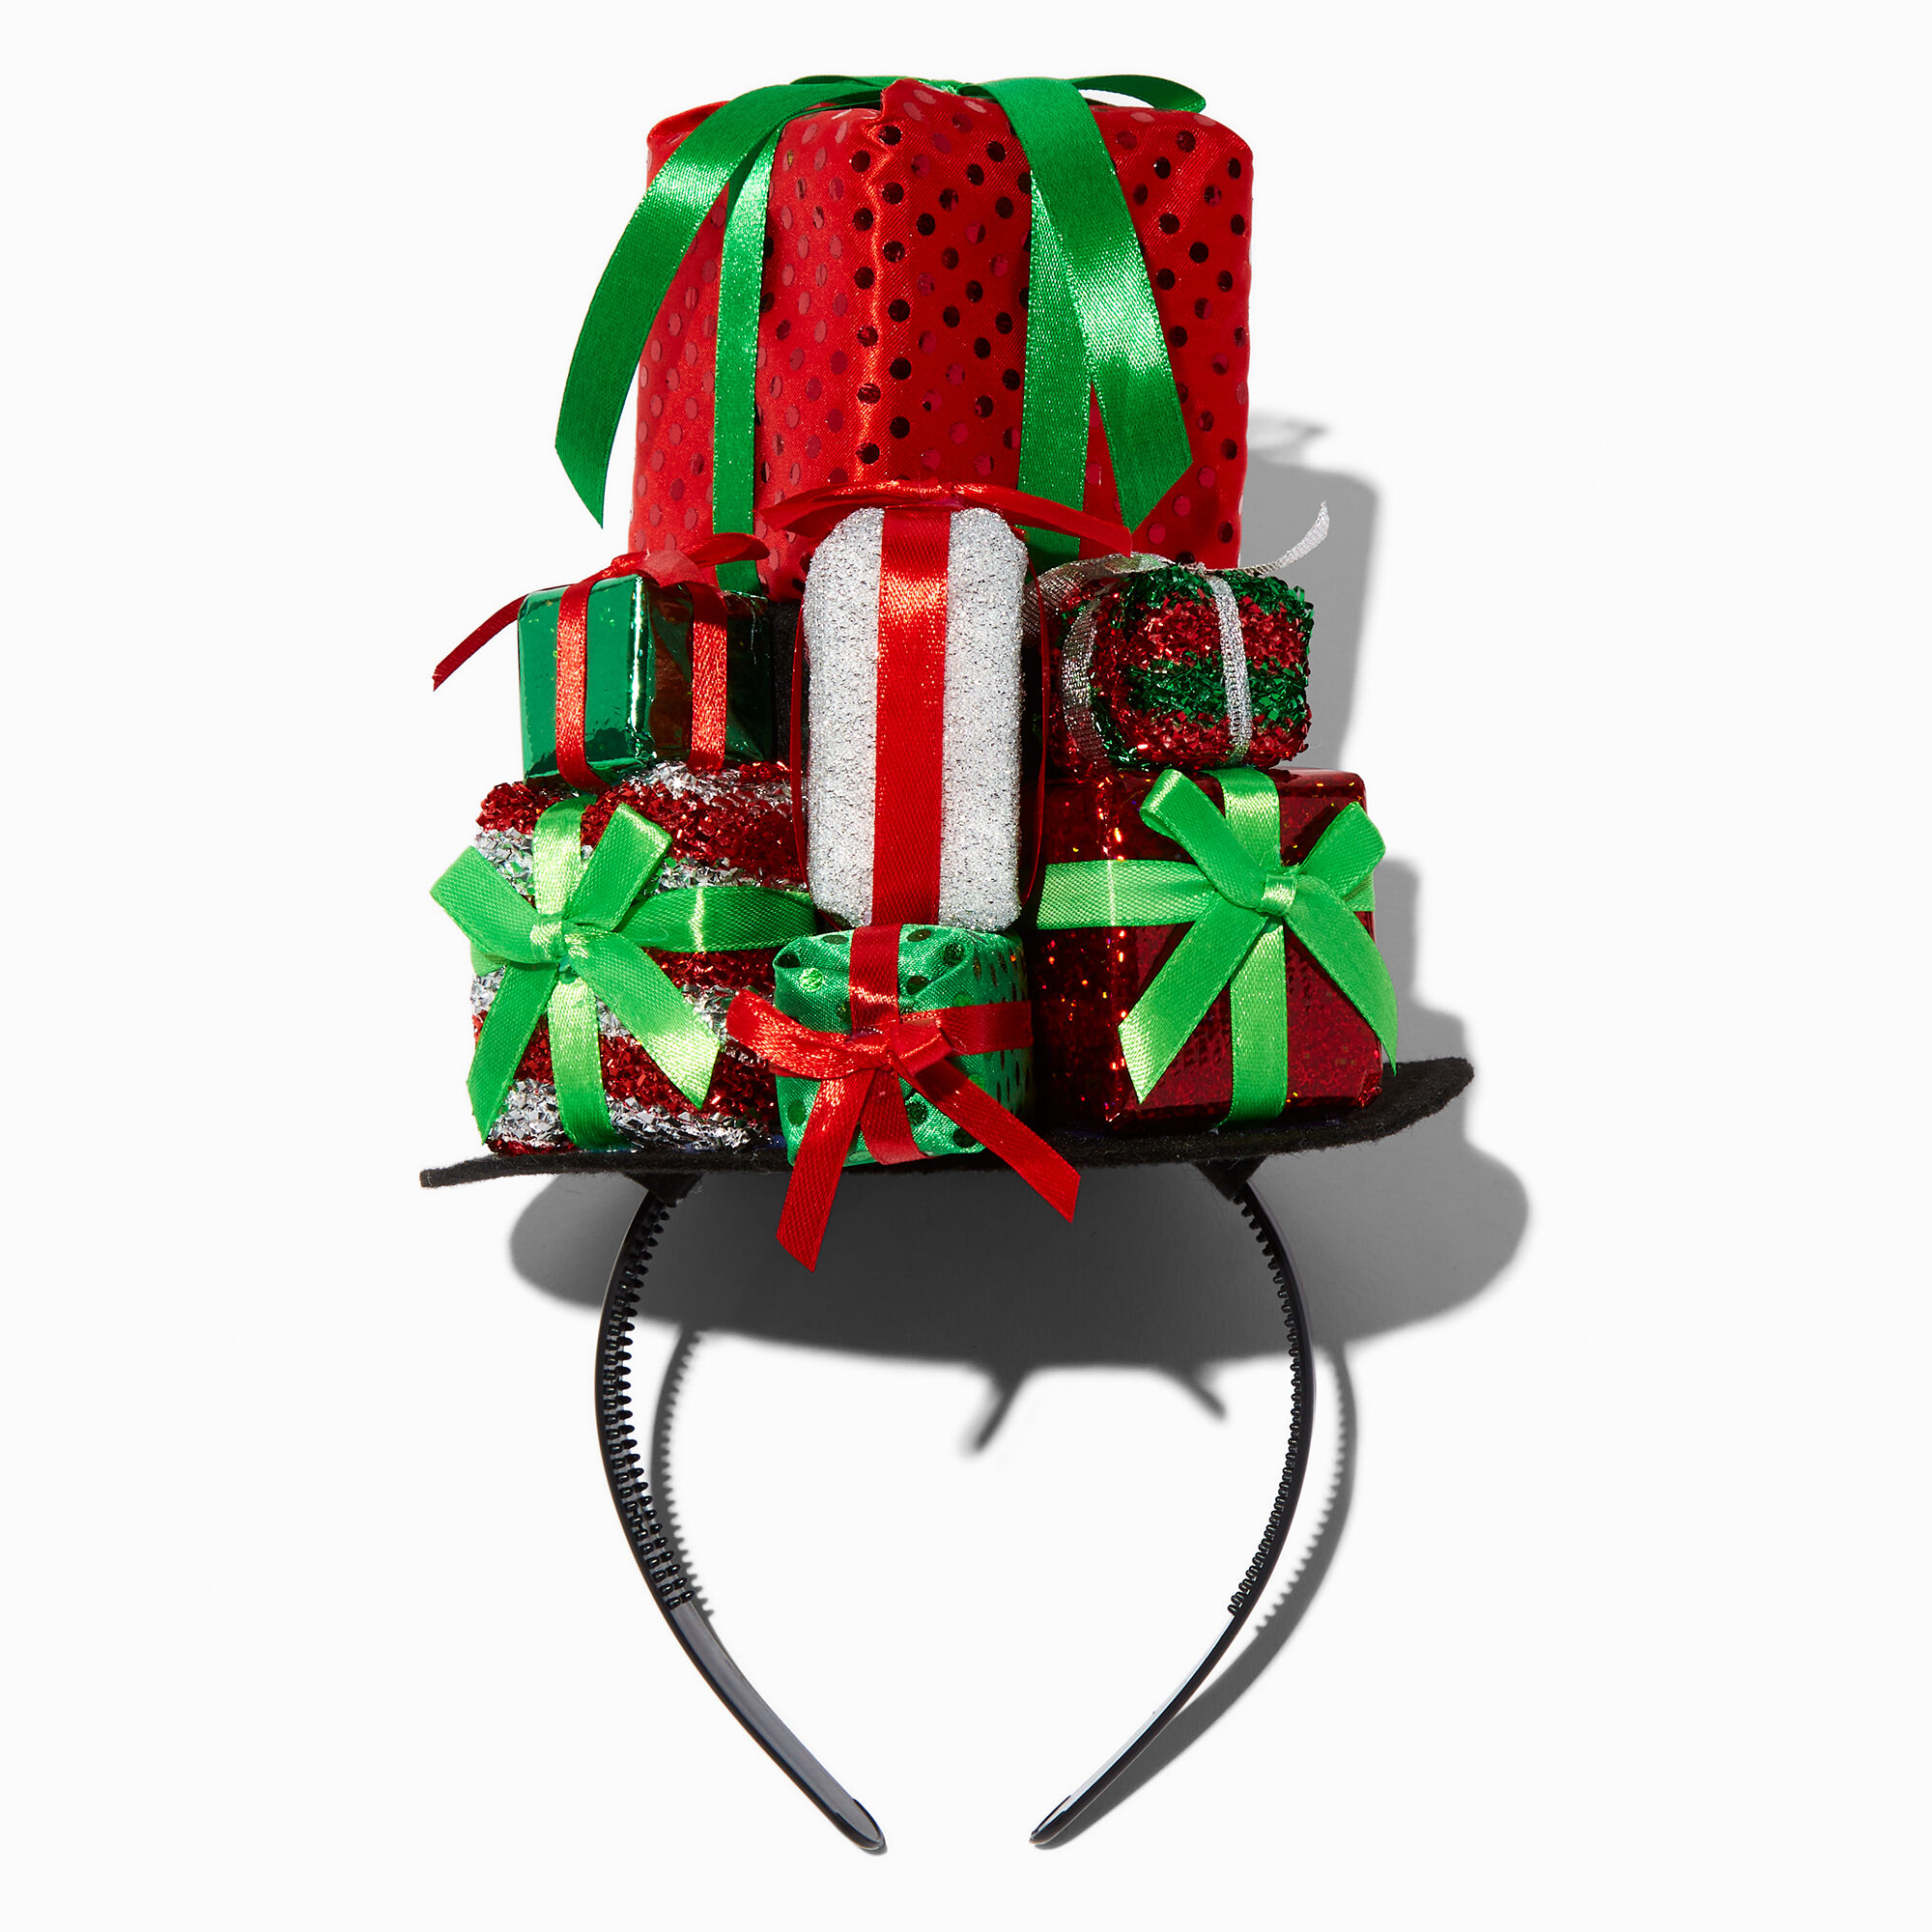 View Claires Christmas Gift Tower Headband information